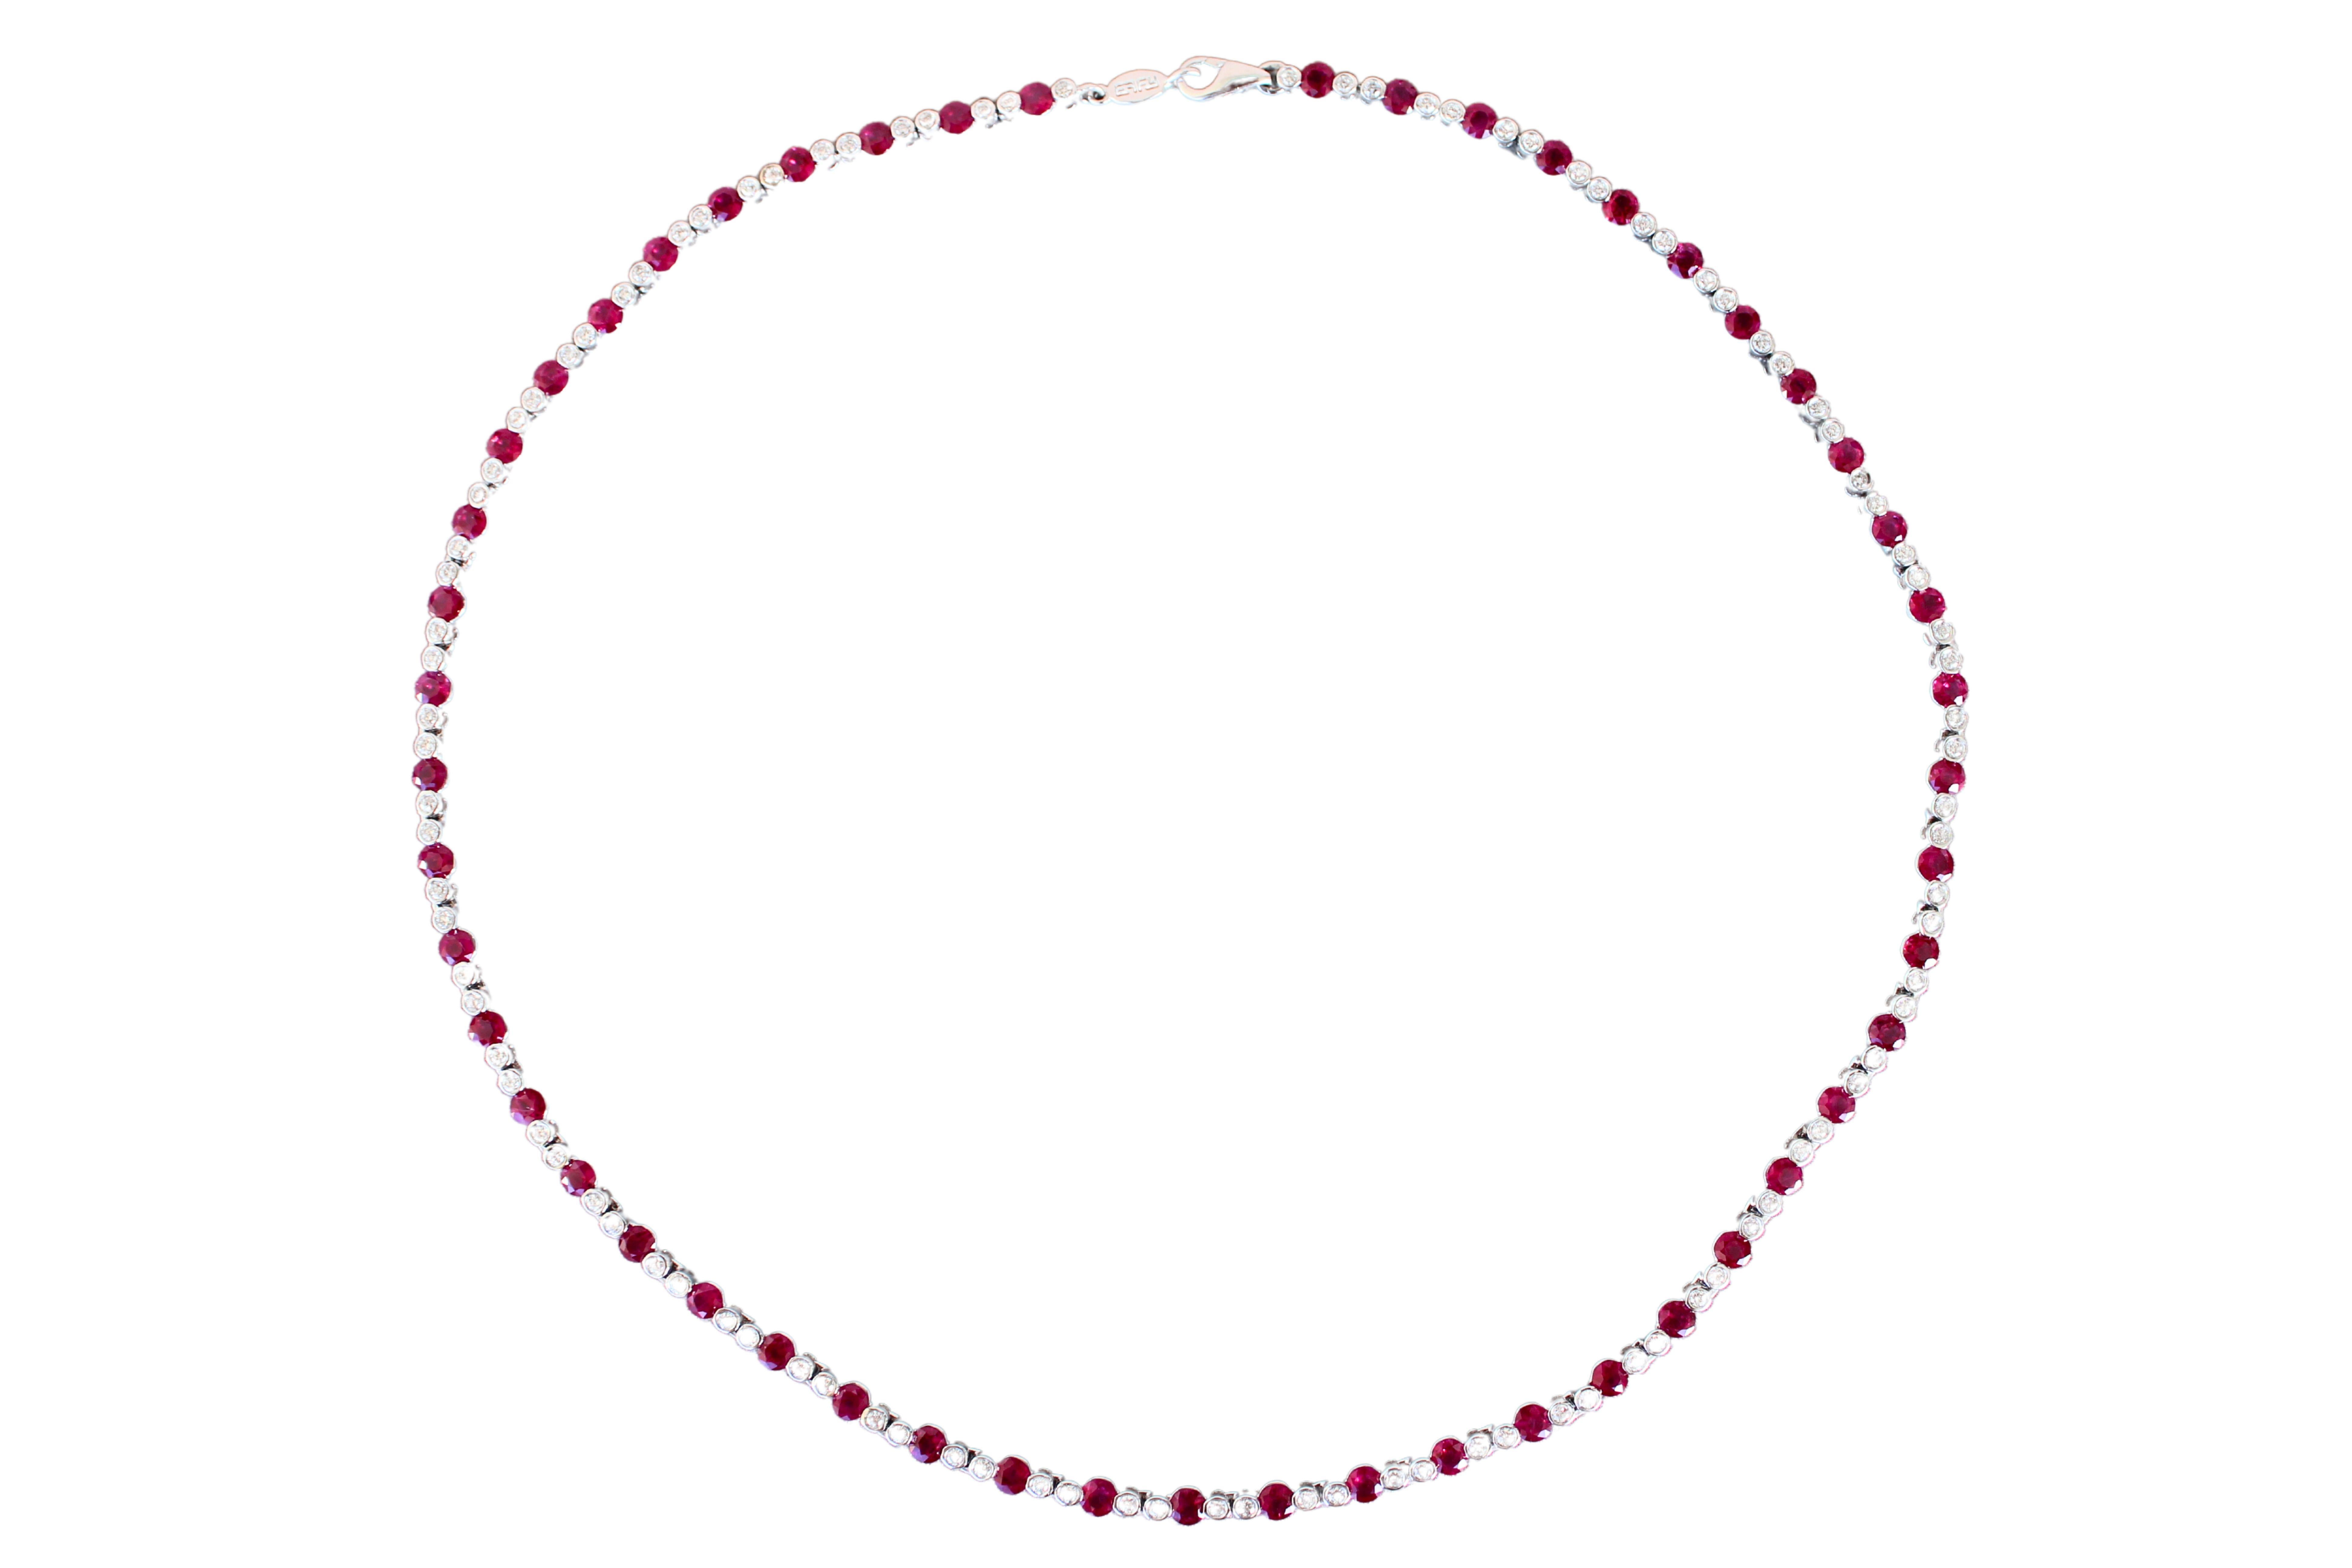 Ruby Diamond Bezel Set Tennis Line 14K White Gold Classic Set Unique Necklace
16.22 Grams
16 Inch Length
A timeless tennis necklace, set with alternating round-cut diamonds and rubies
Diamonds: 3.05 ctw G/VS Quality
Rubies: 4.60 ctw AA Quality
14K